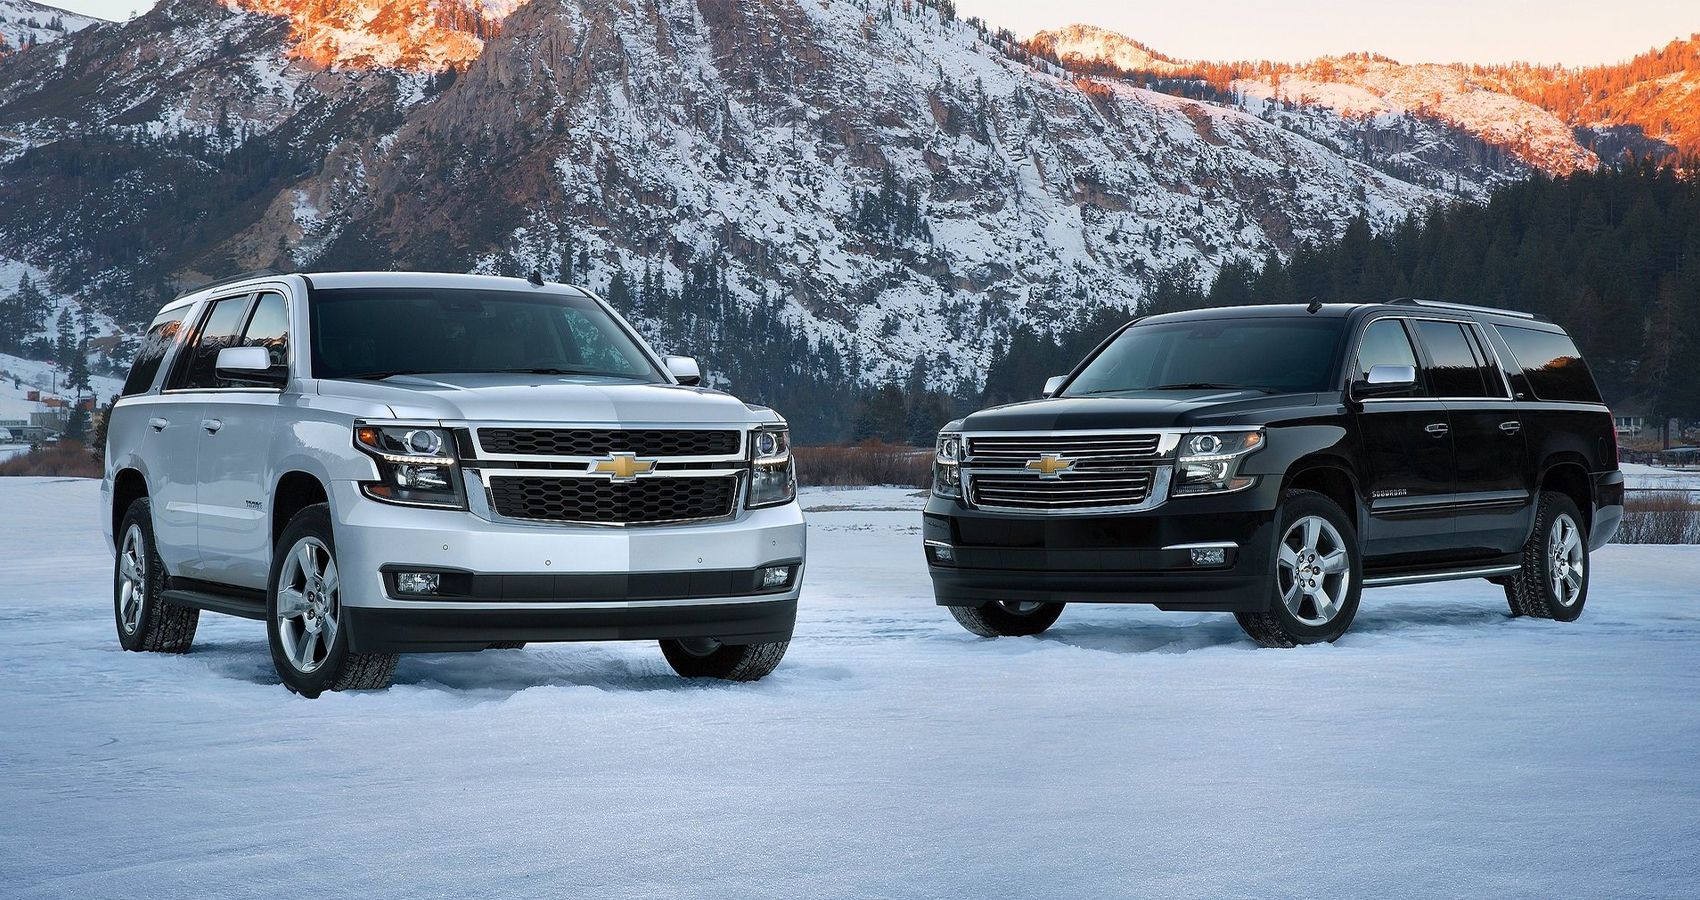 2015 Chevrolet Suburbans in Silver and Black